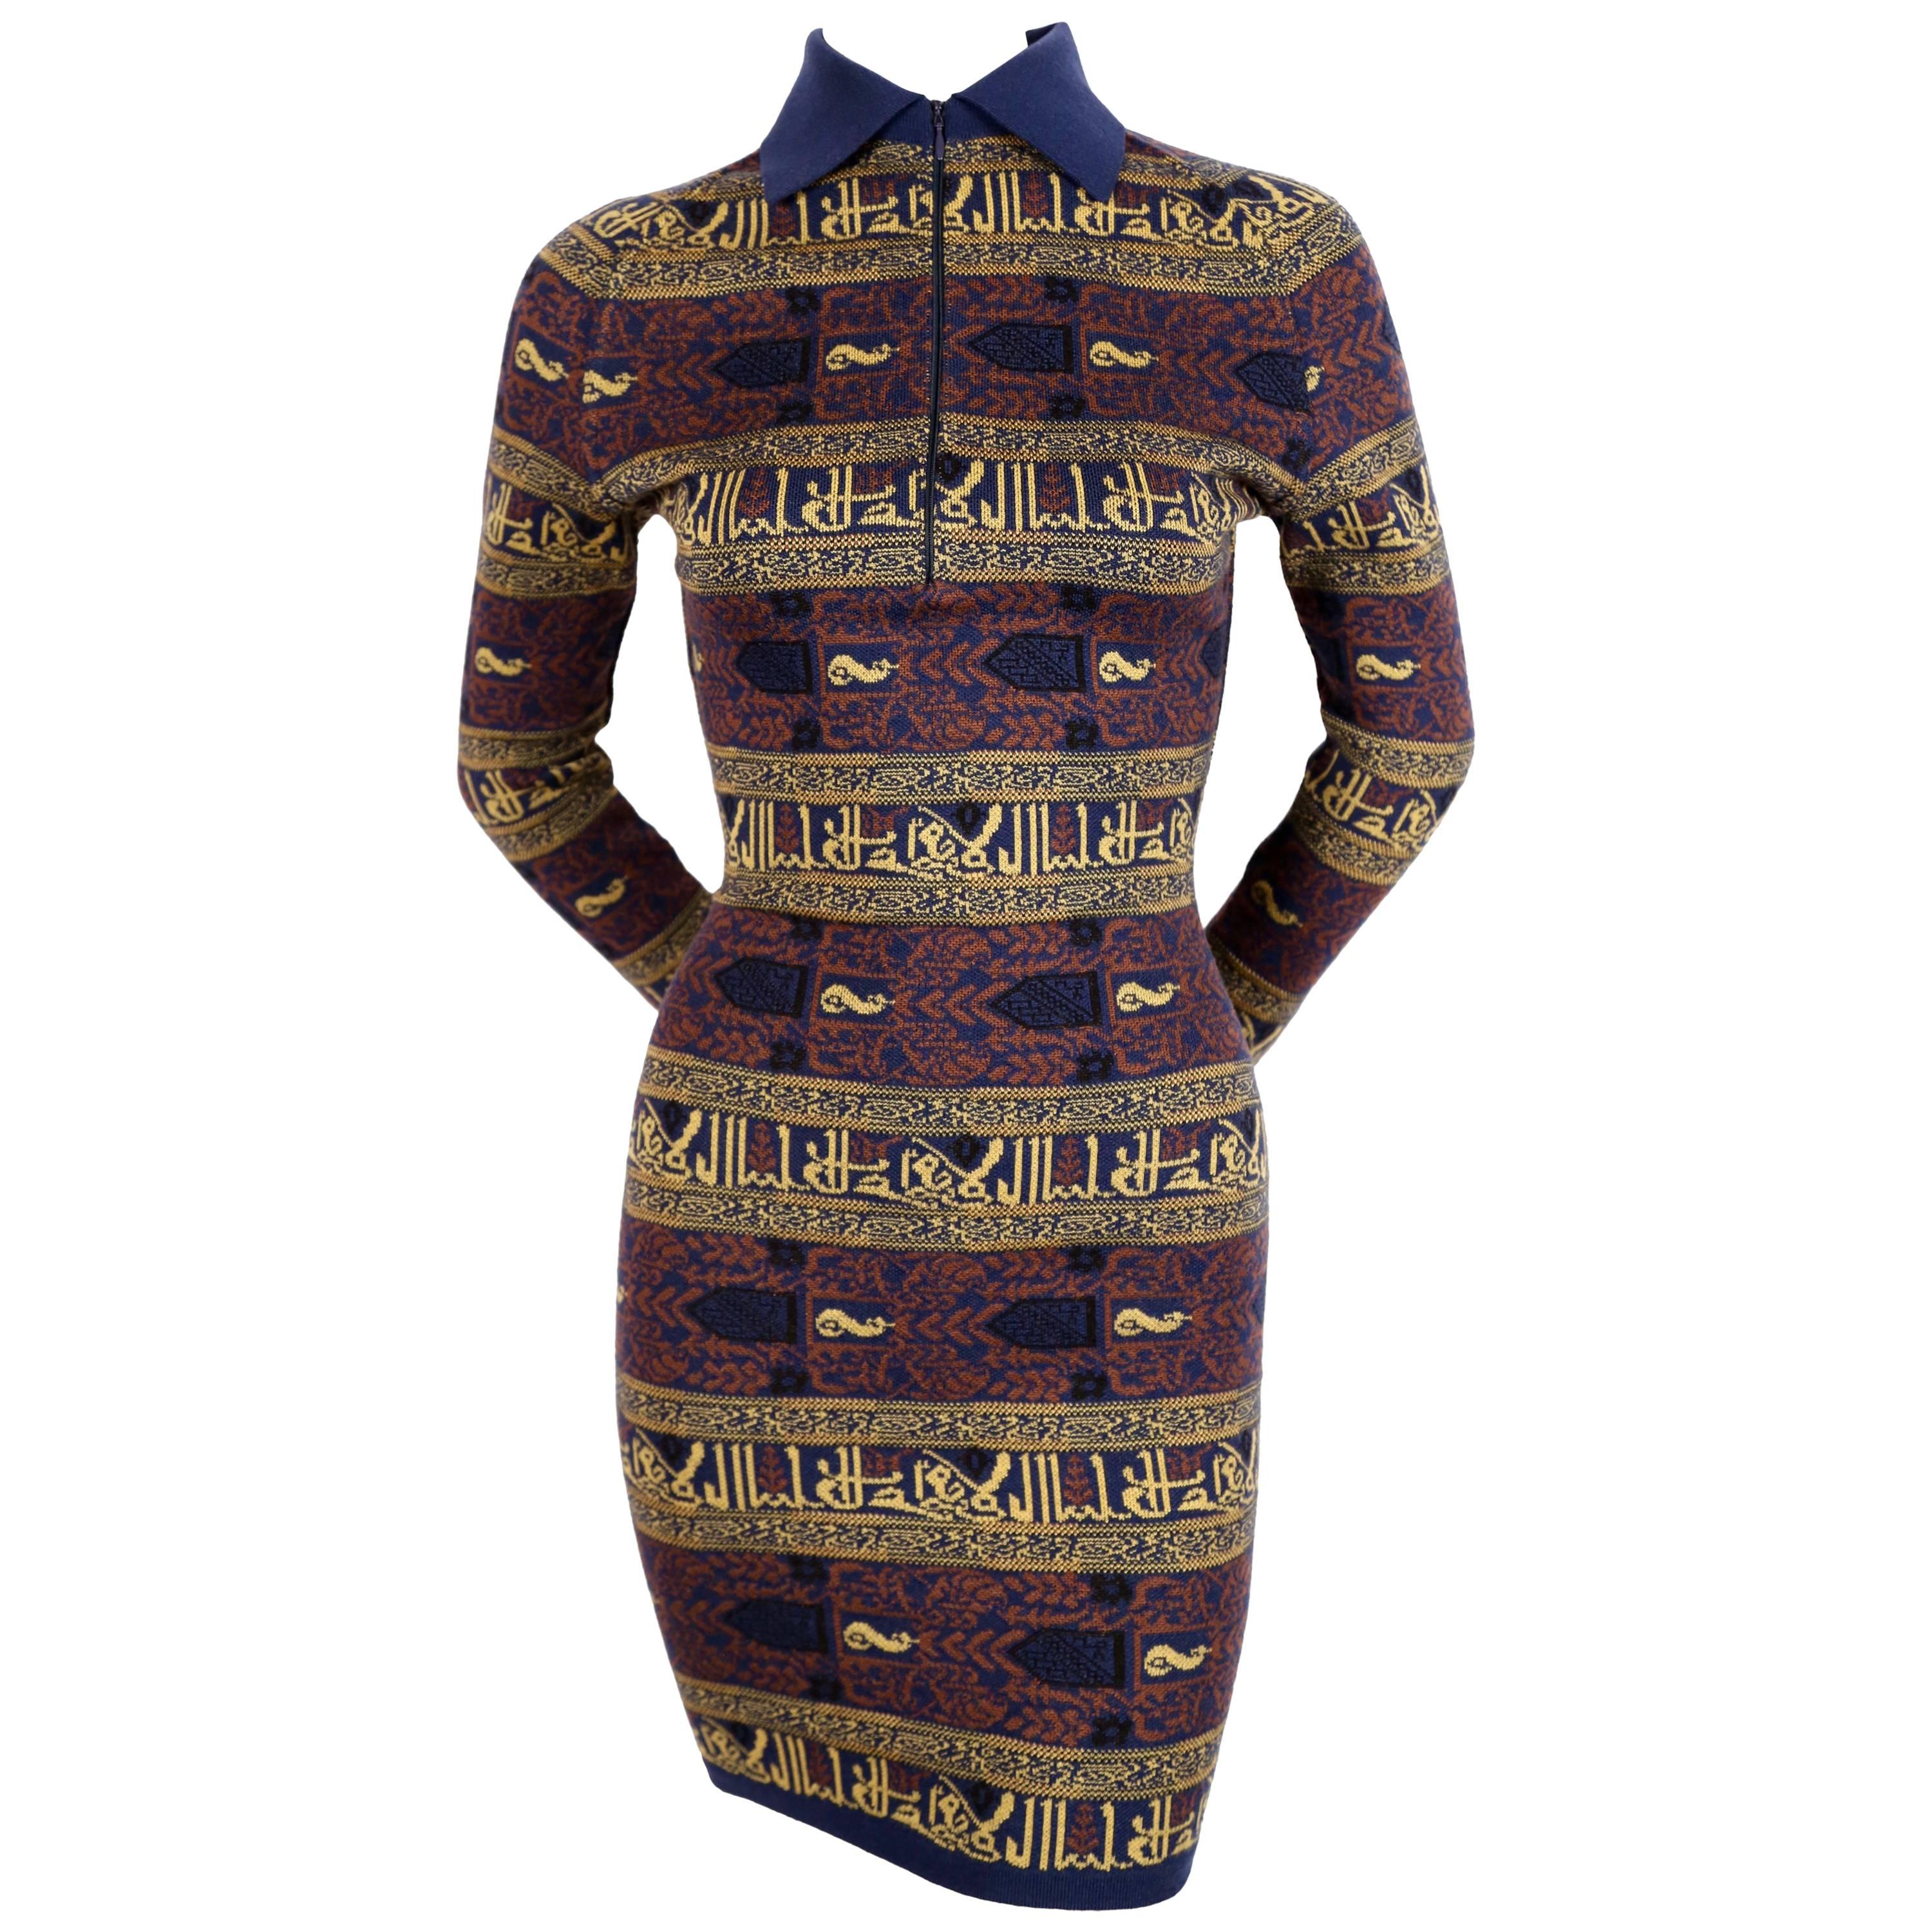 1990 ALAIA dress with Arabic calligraphy in the Kufic script